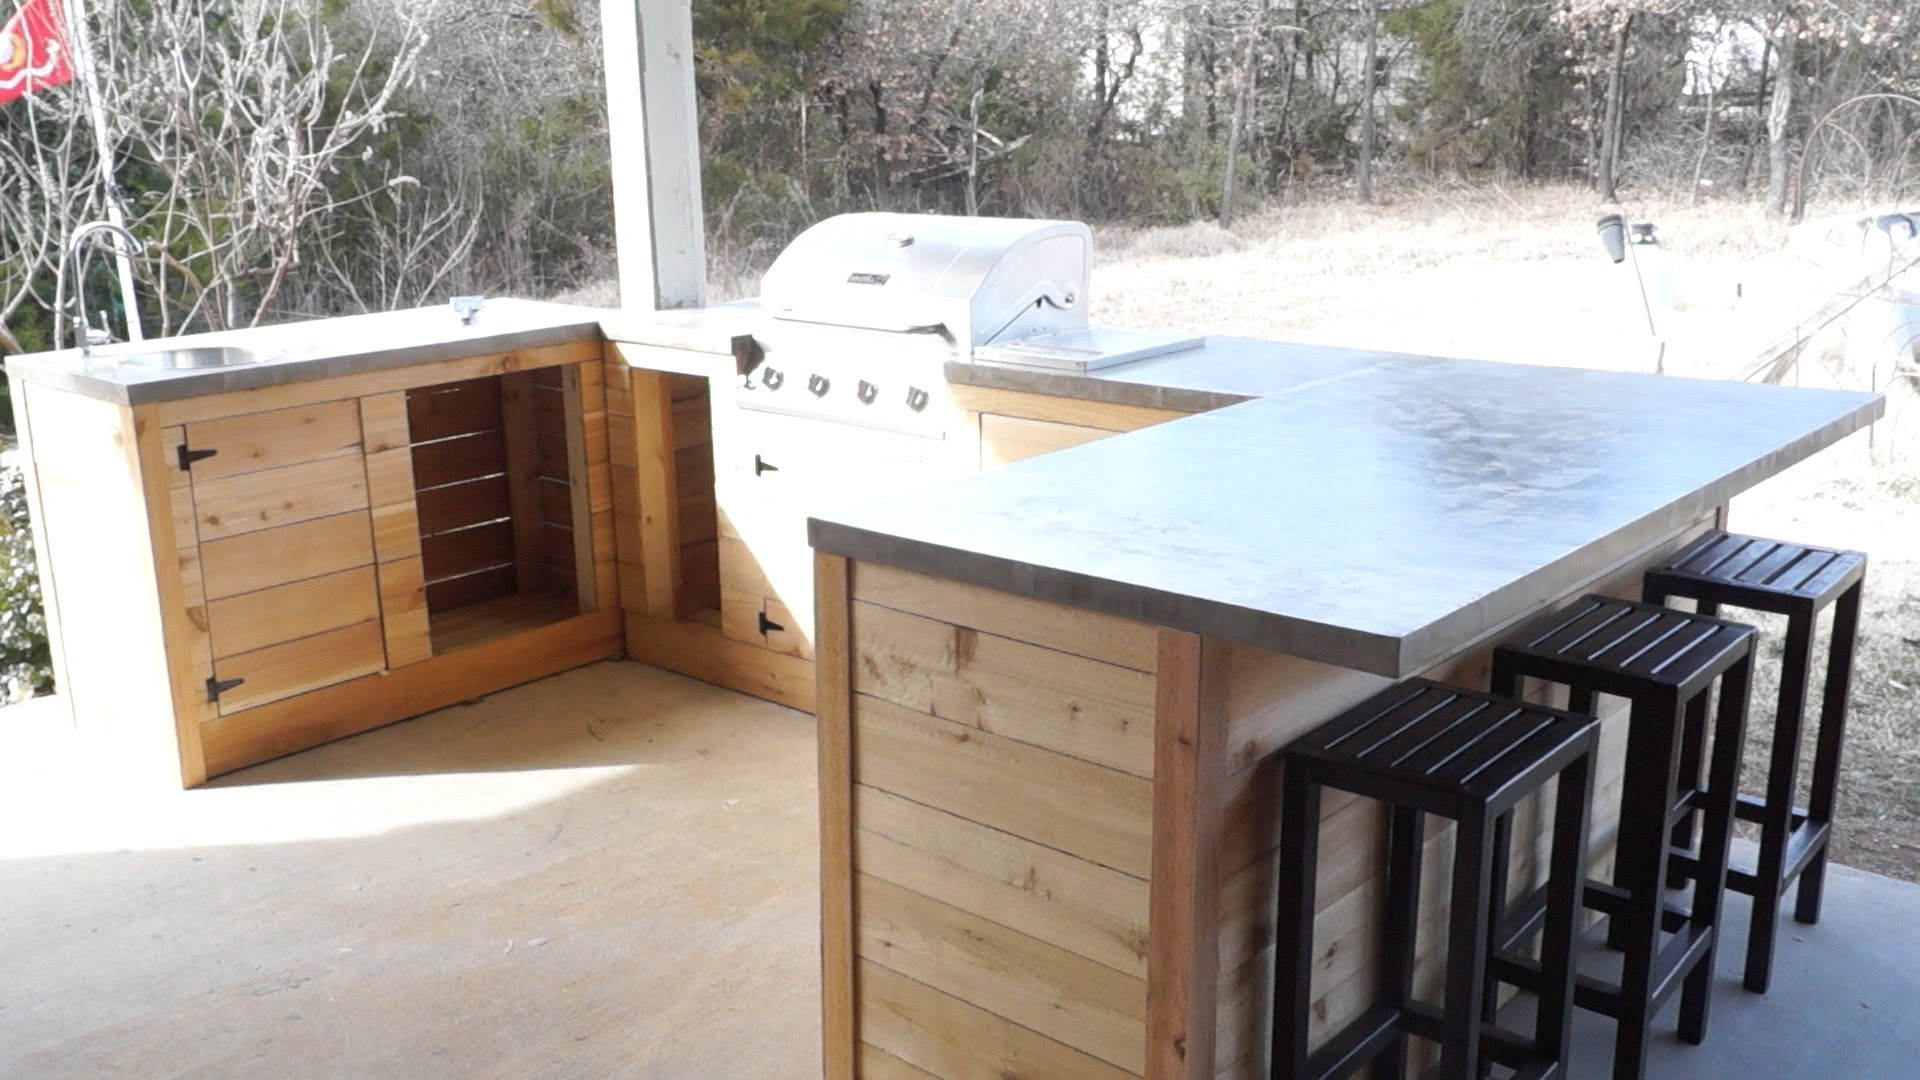 DIY Outdoor Cabinet
 3 Plans to Make a Simple Outdoor Kitchen Interior